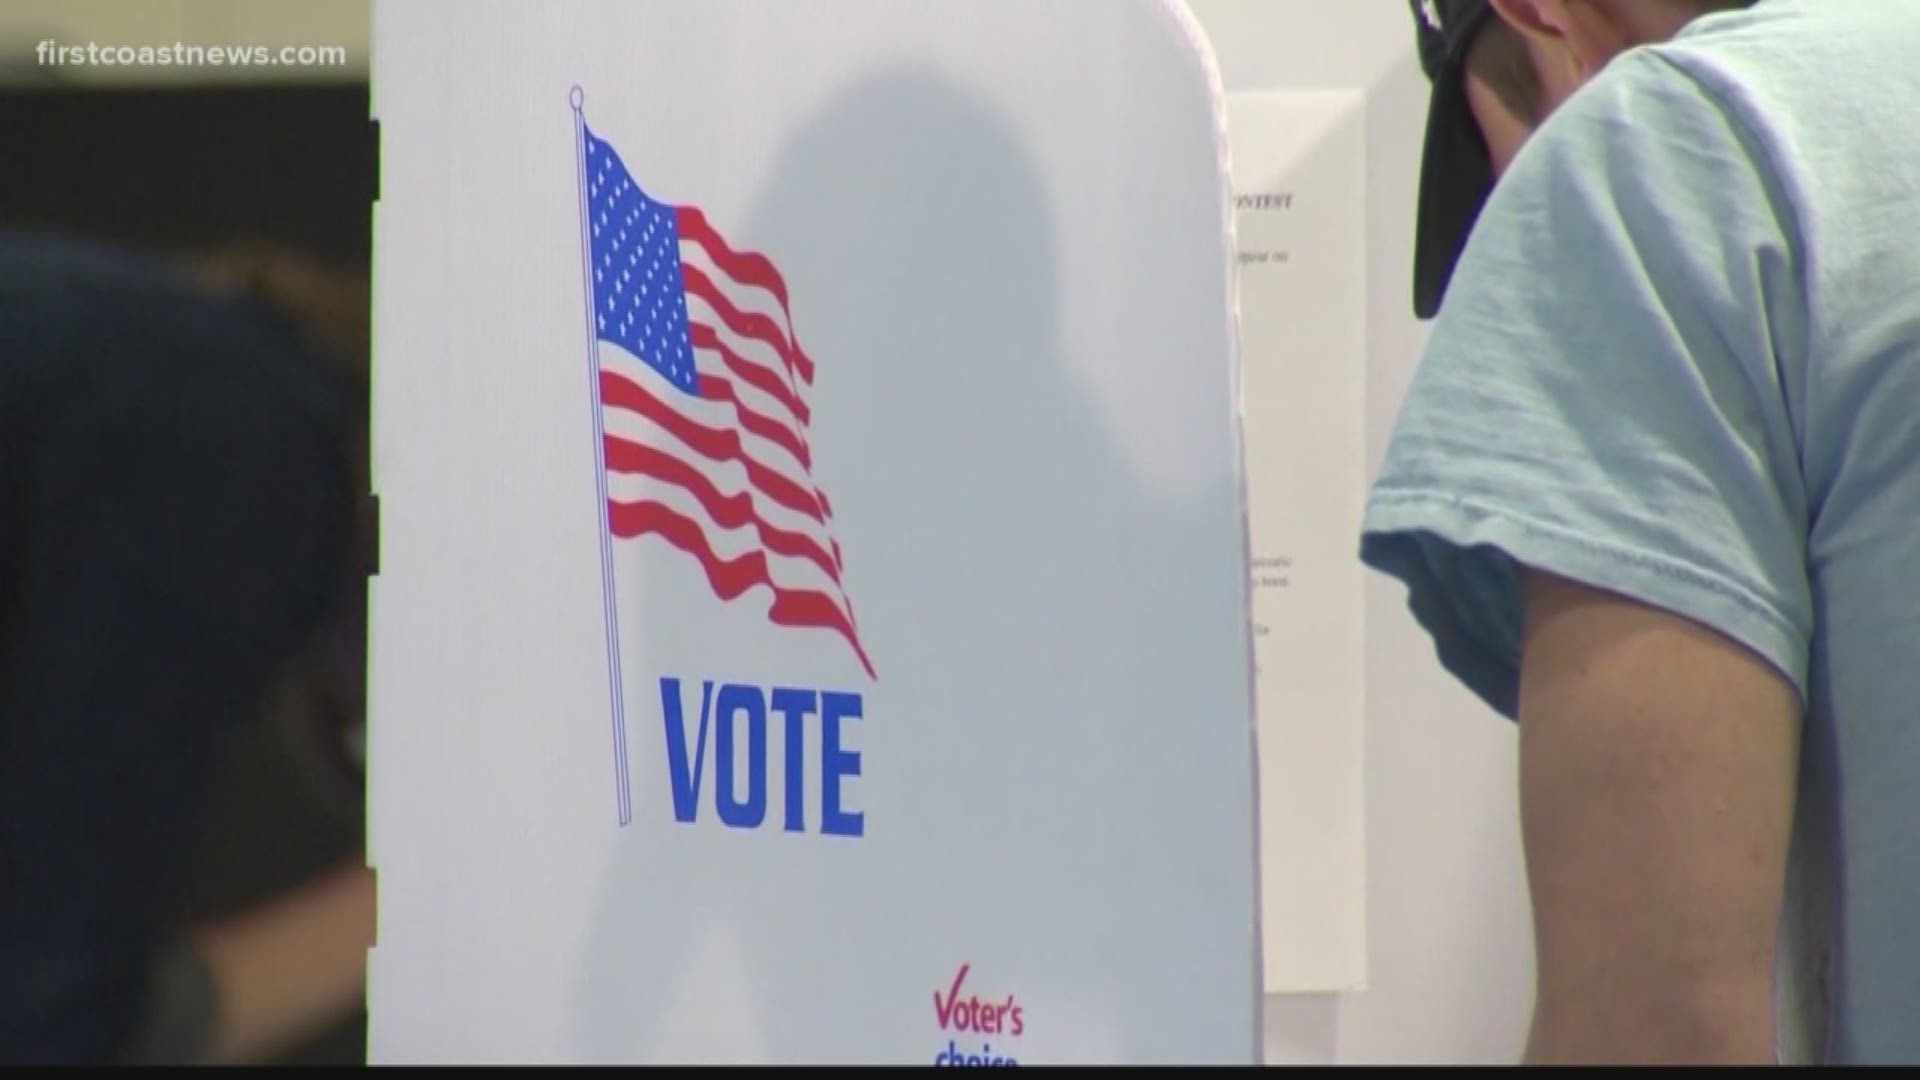 St. Johns County is receiving $120,000 to help protect against cyber attacks this election.